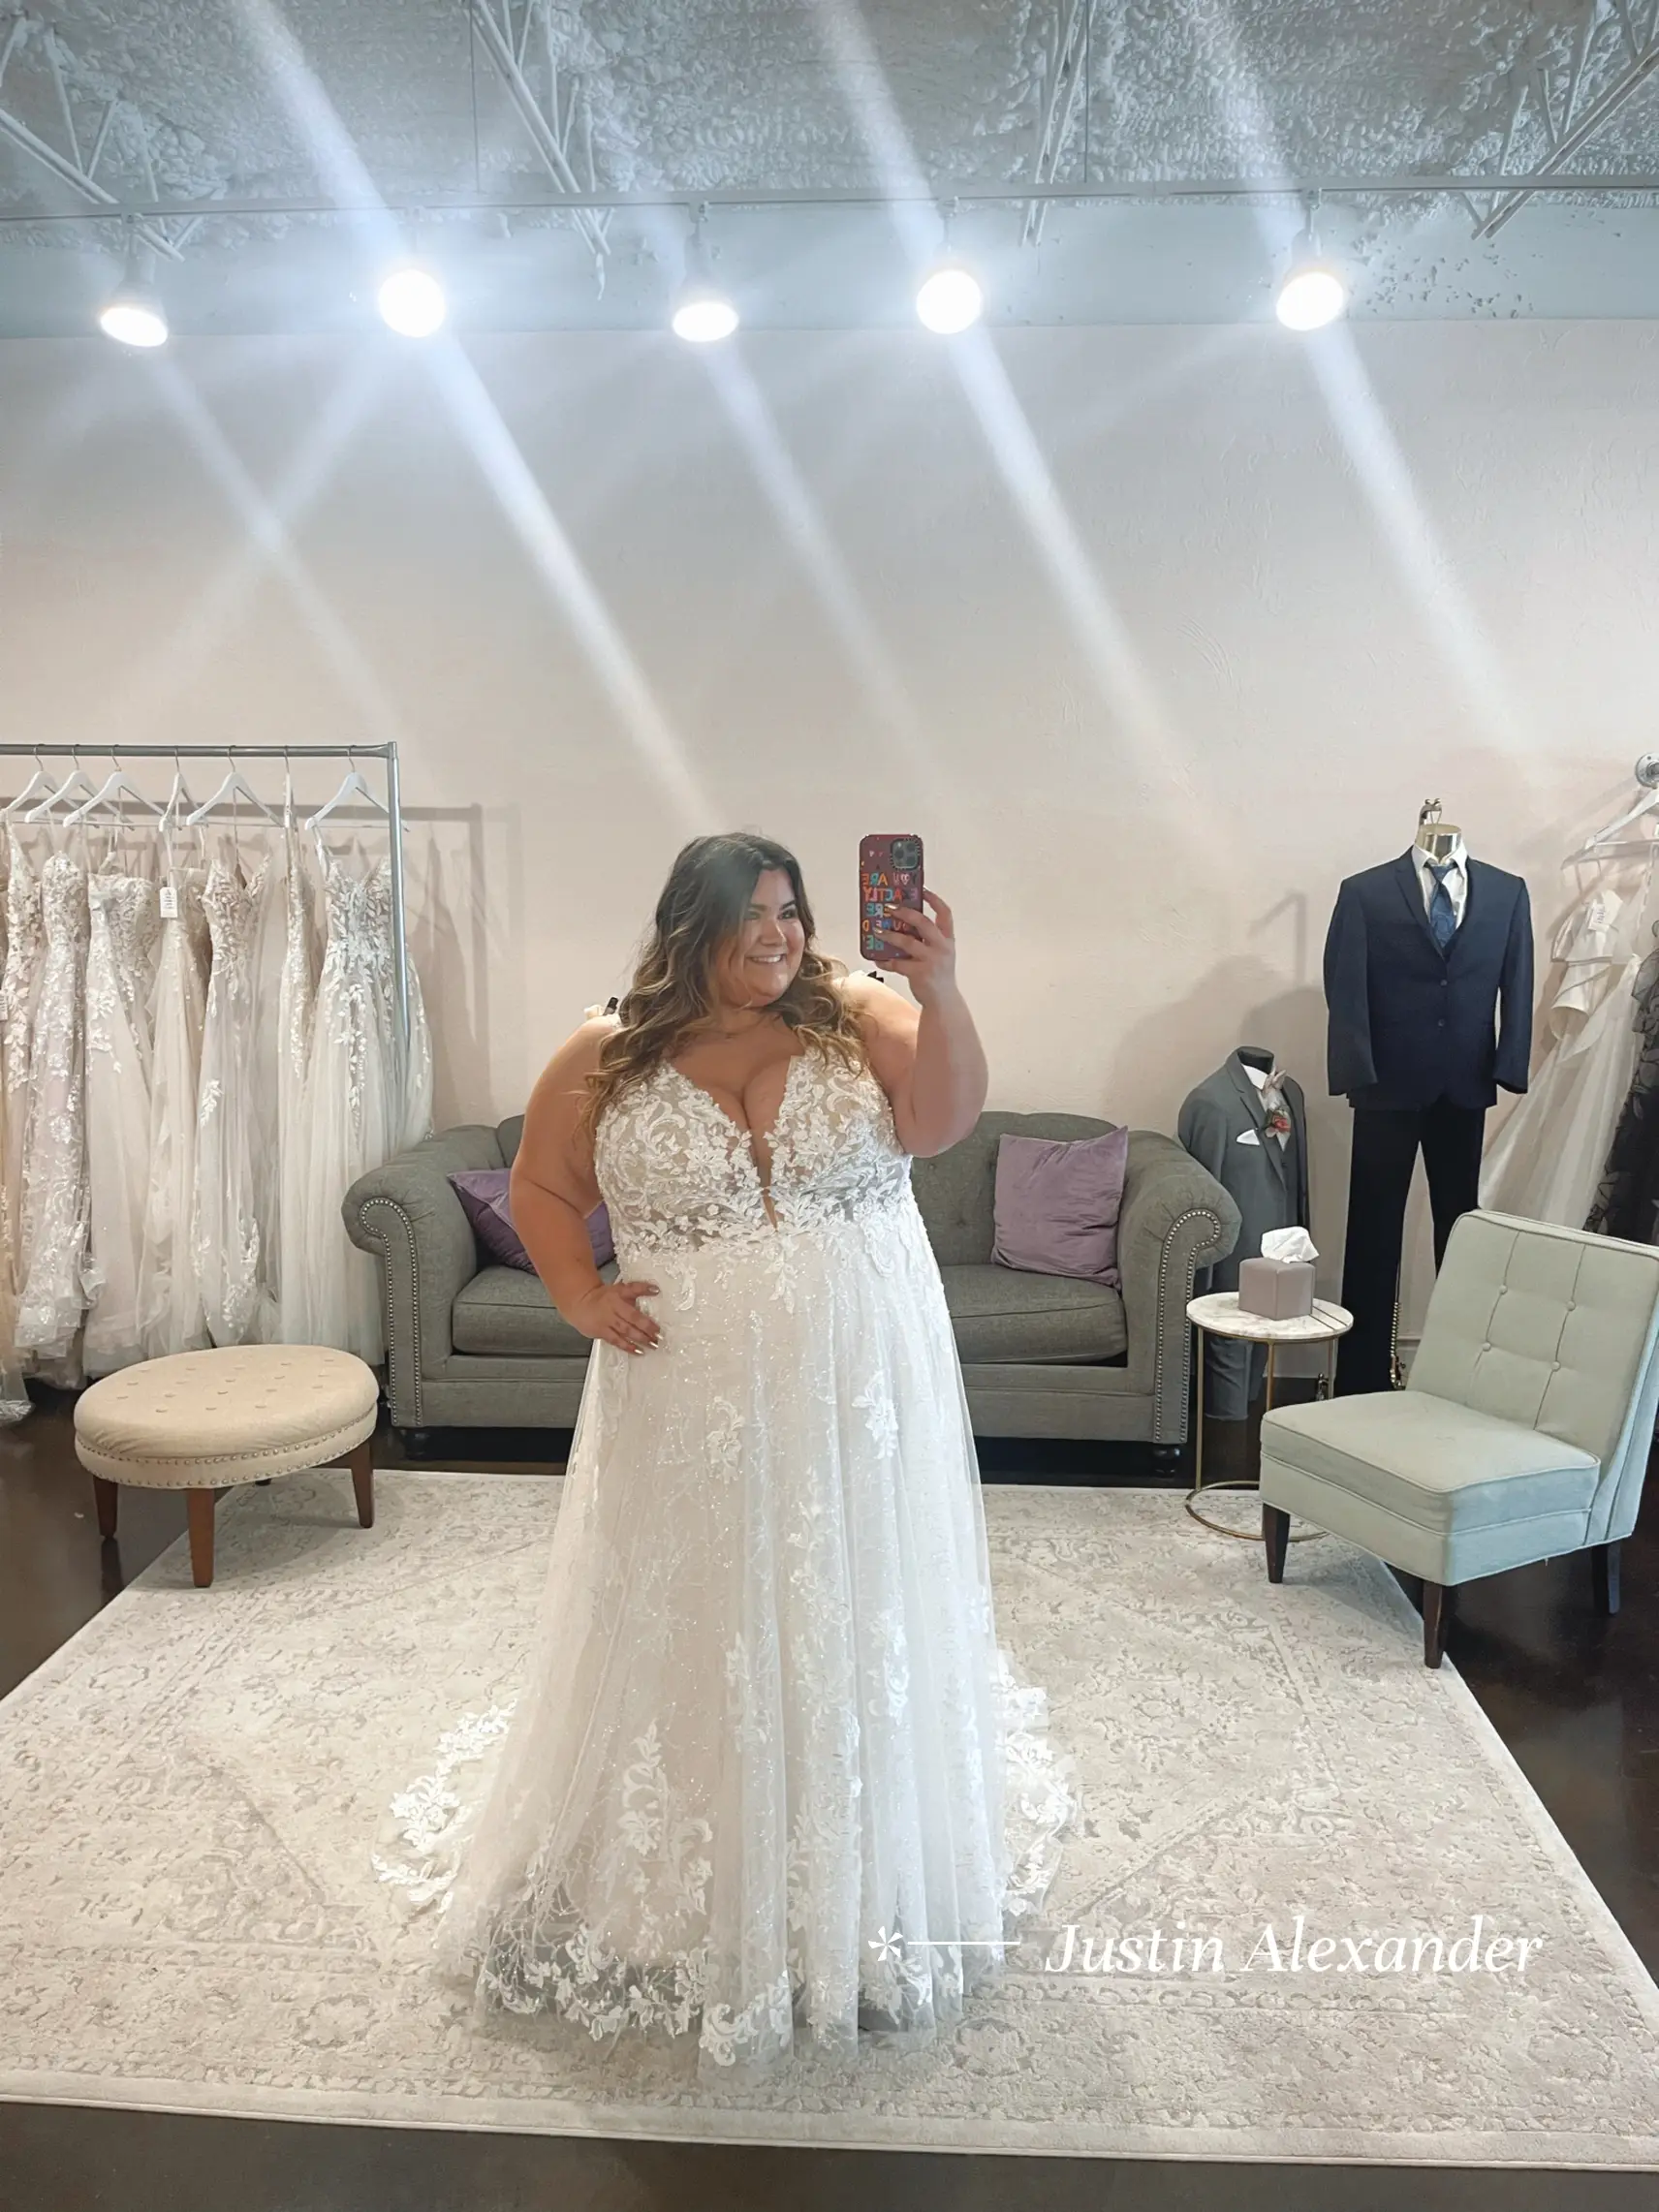 MIDSIZE CURVY BRIDES TO BE! 🤍💍✨ this video may be for you if